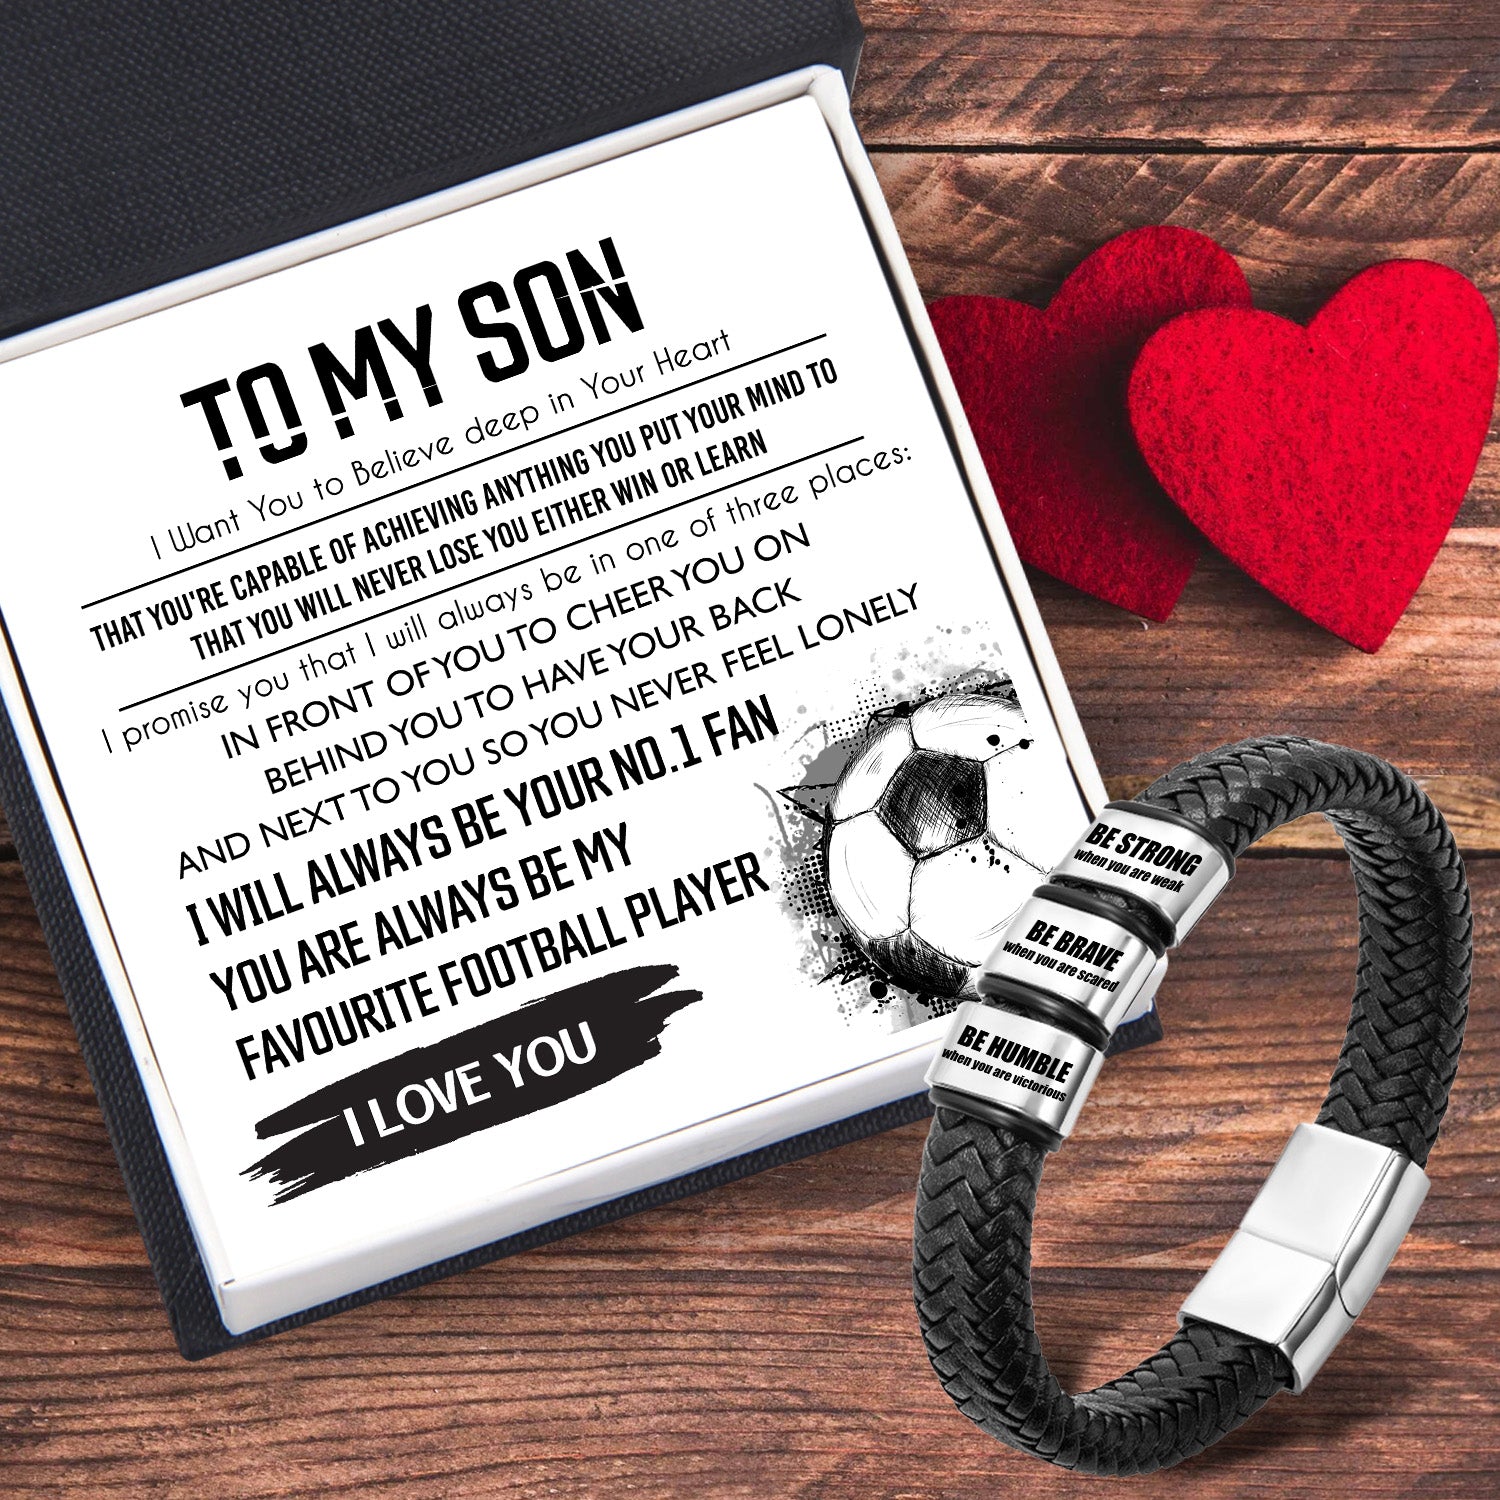 Leather Bracelet - Football - To My Son - I Love You - Ukgbzl16029